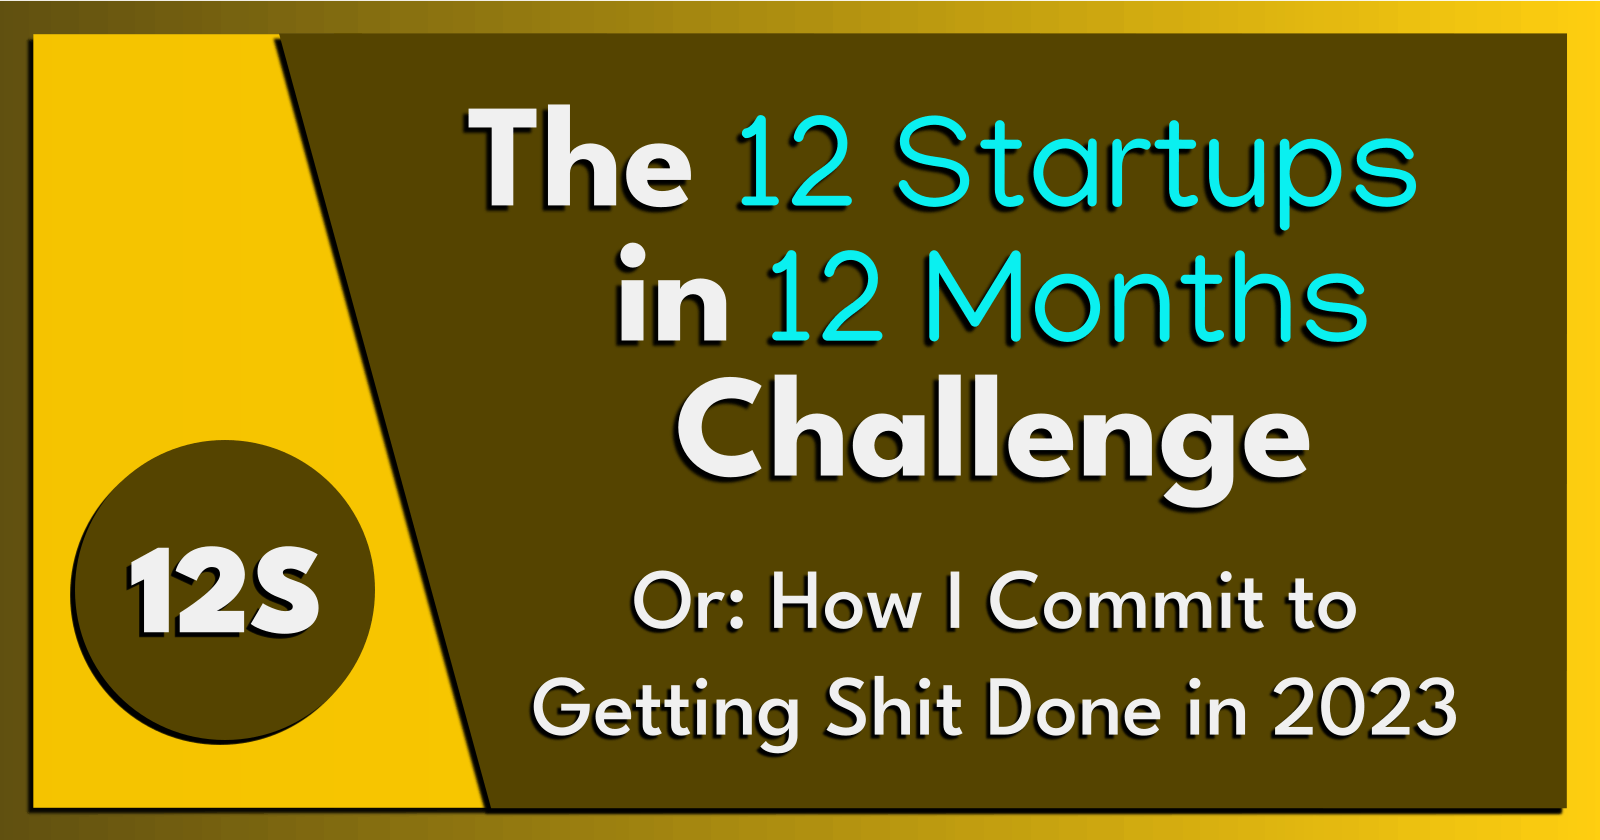 12S: The "12 Startups in 12 Months" Challenge.